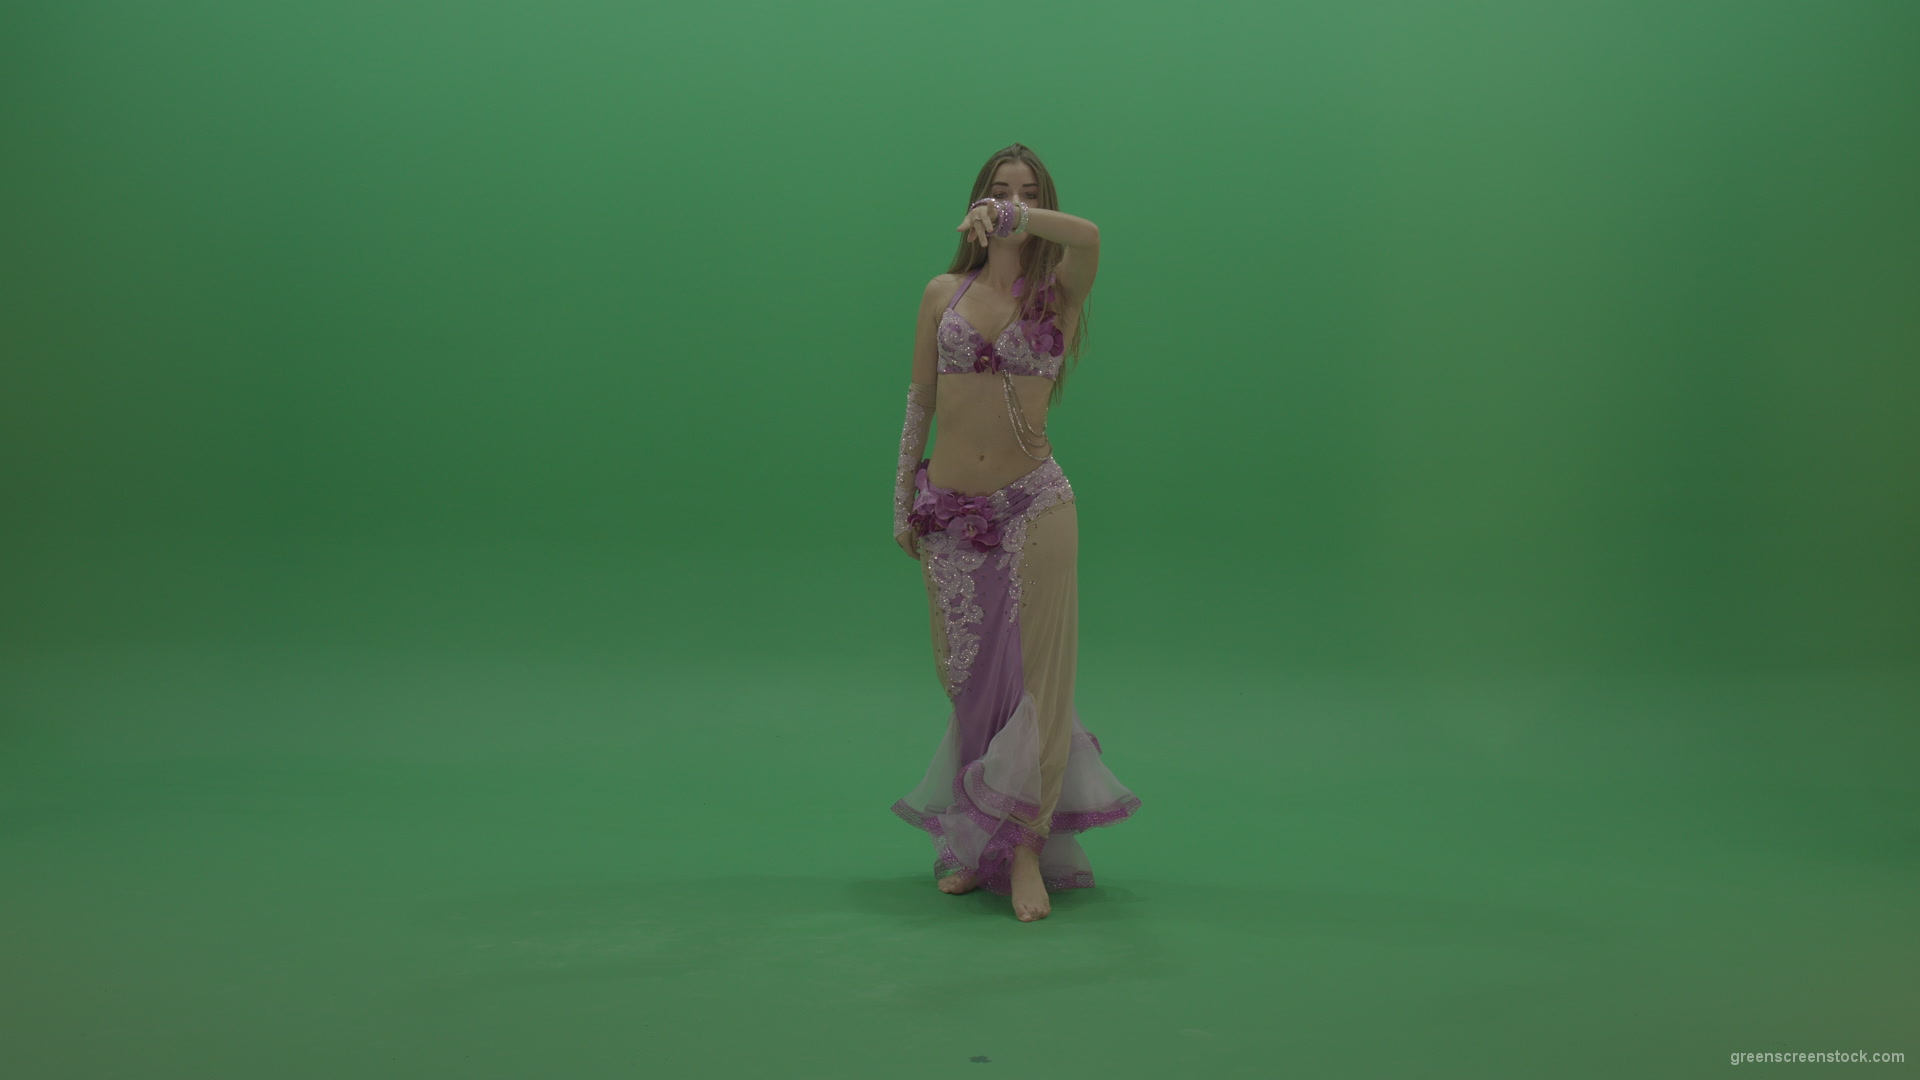 Beautiful-belly-dancer-display-amazing-dance-moves-over-chromakey-background_005 Green Screen Stock